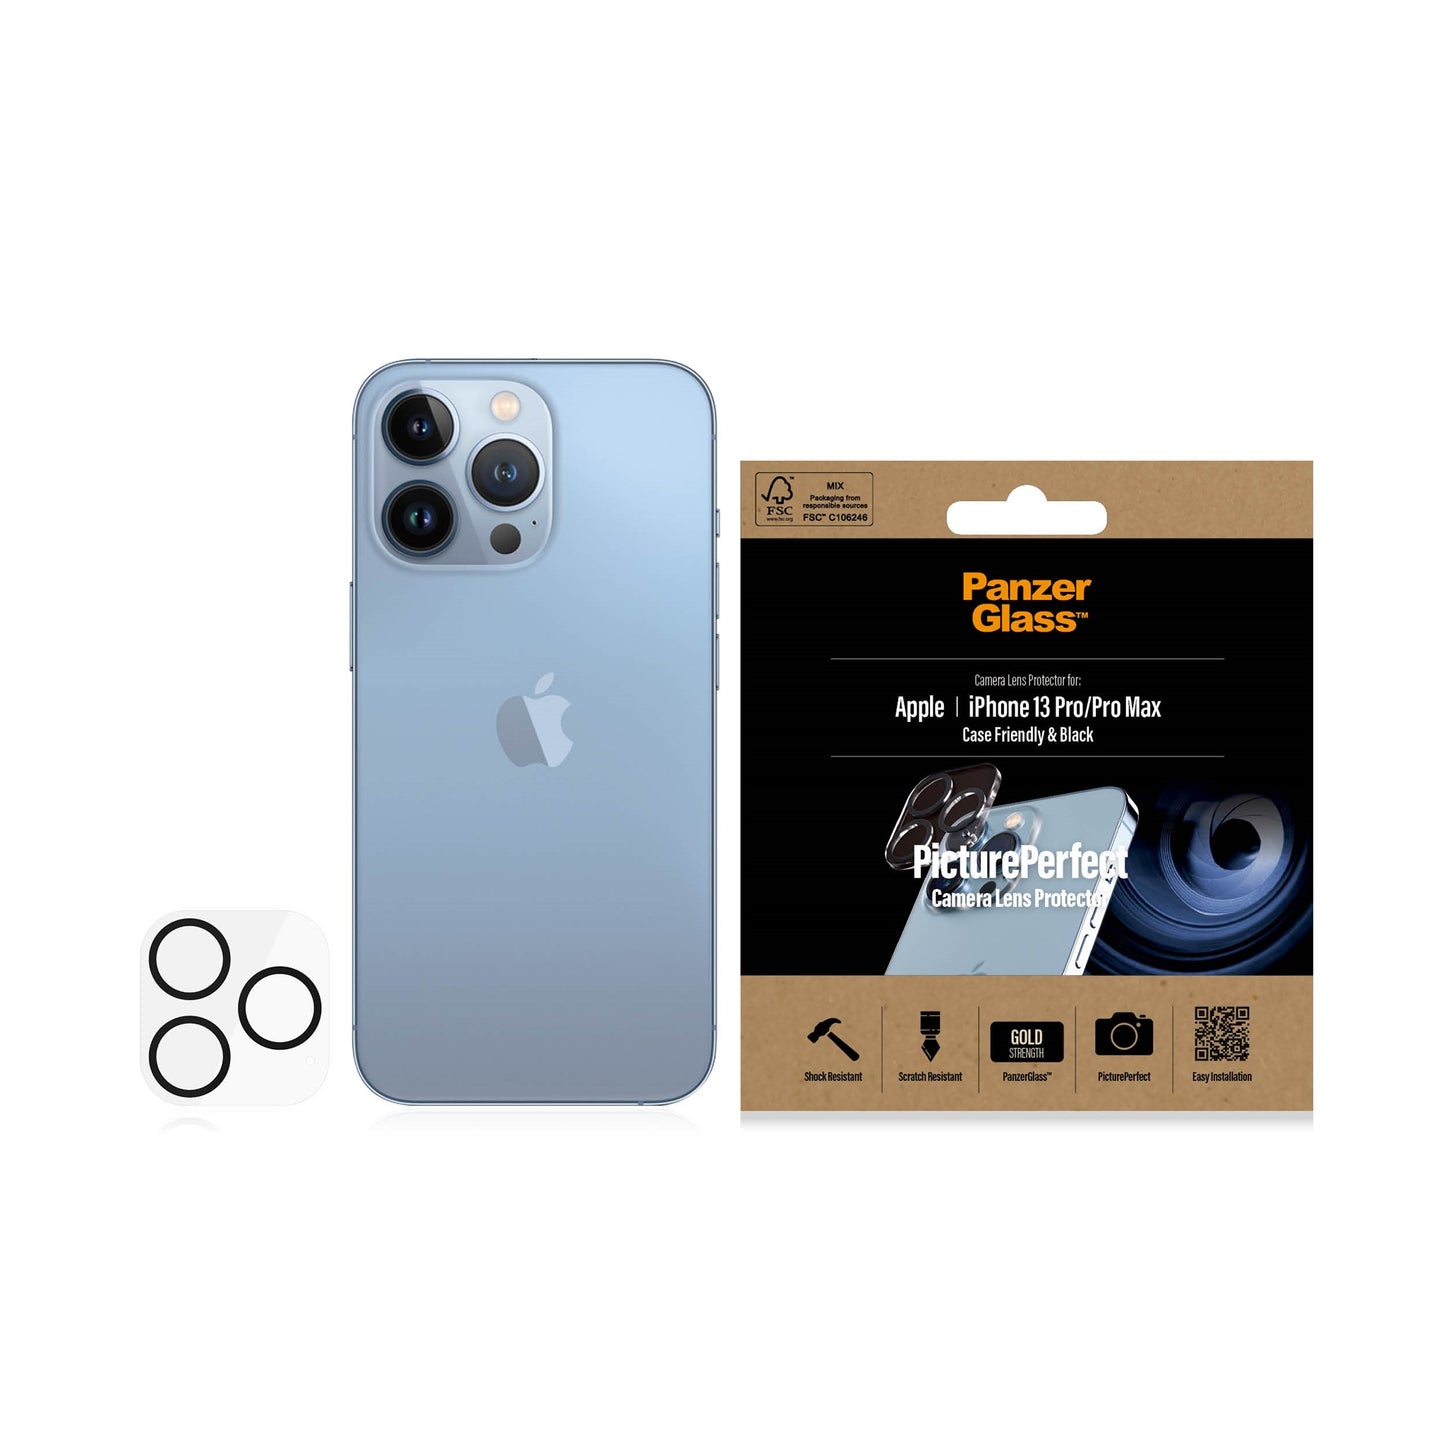 PanzerGlass® PicturePerfect Camera Lens Protector Apple iPhone 13 Pro | 13 Pro Max 3